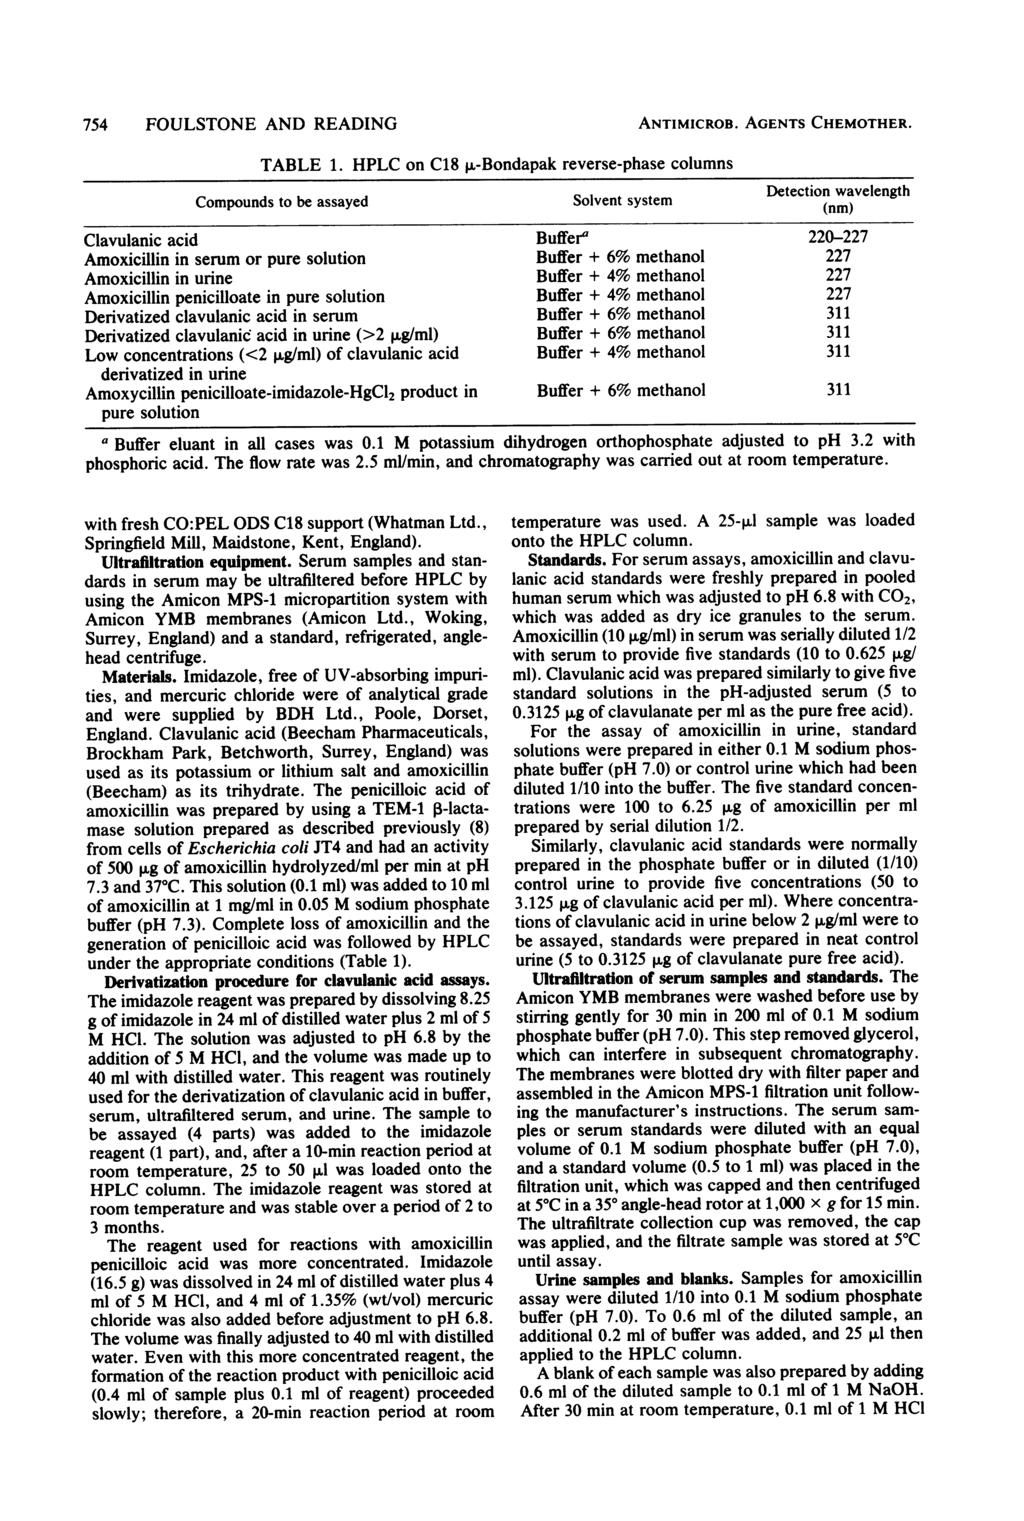 754 FOULSTONE AND READING ANTIMICROB. AGENTS CHEMOTHER. TABLE 1.